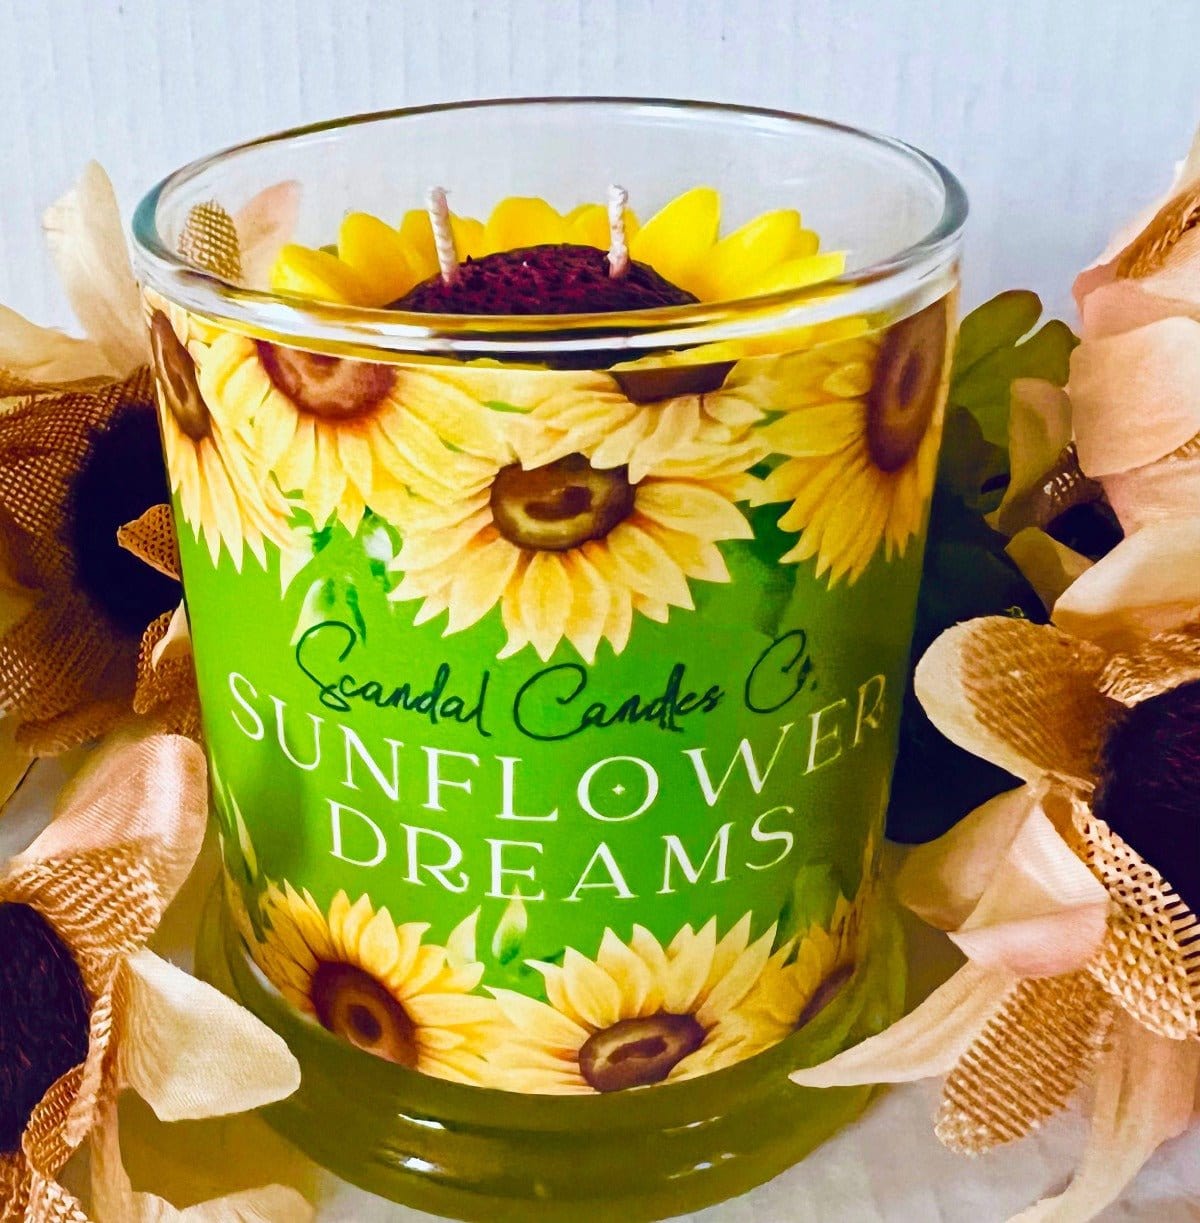 Sunflower Dreams - Scandal Candles Co.